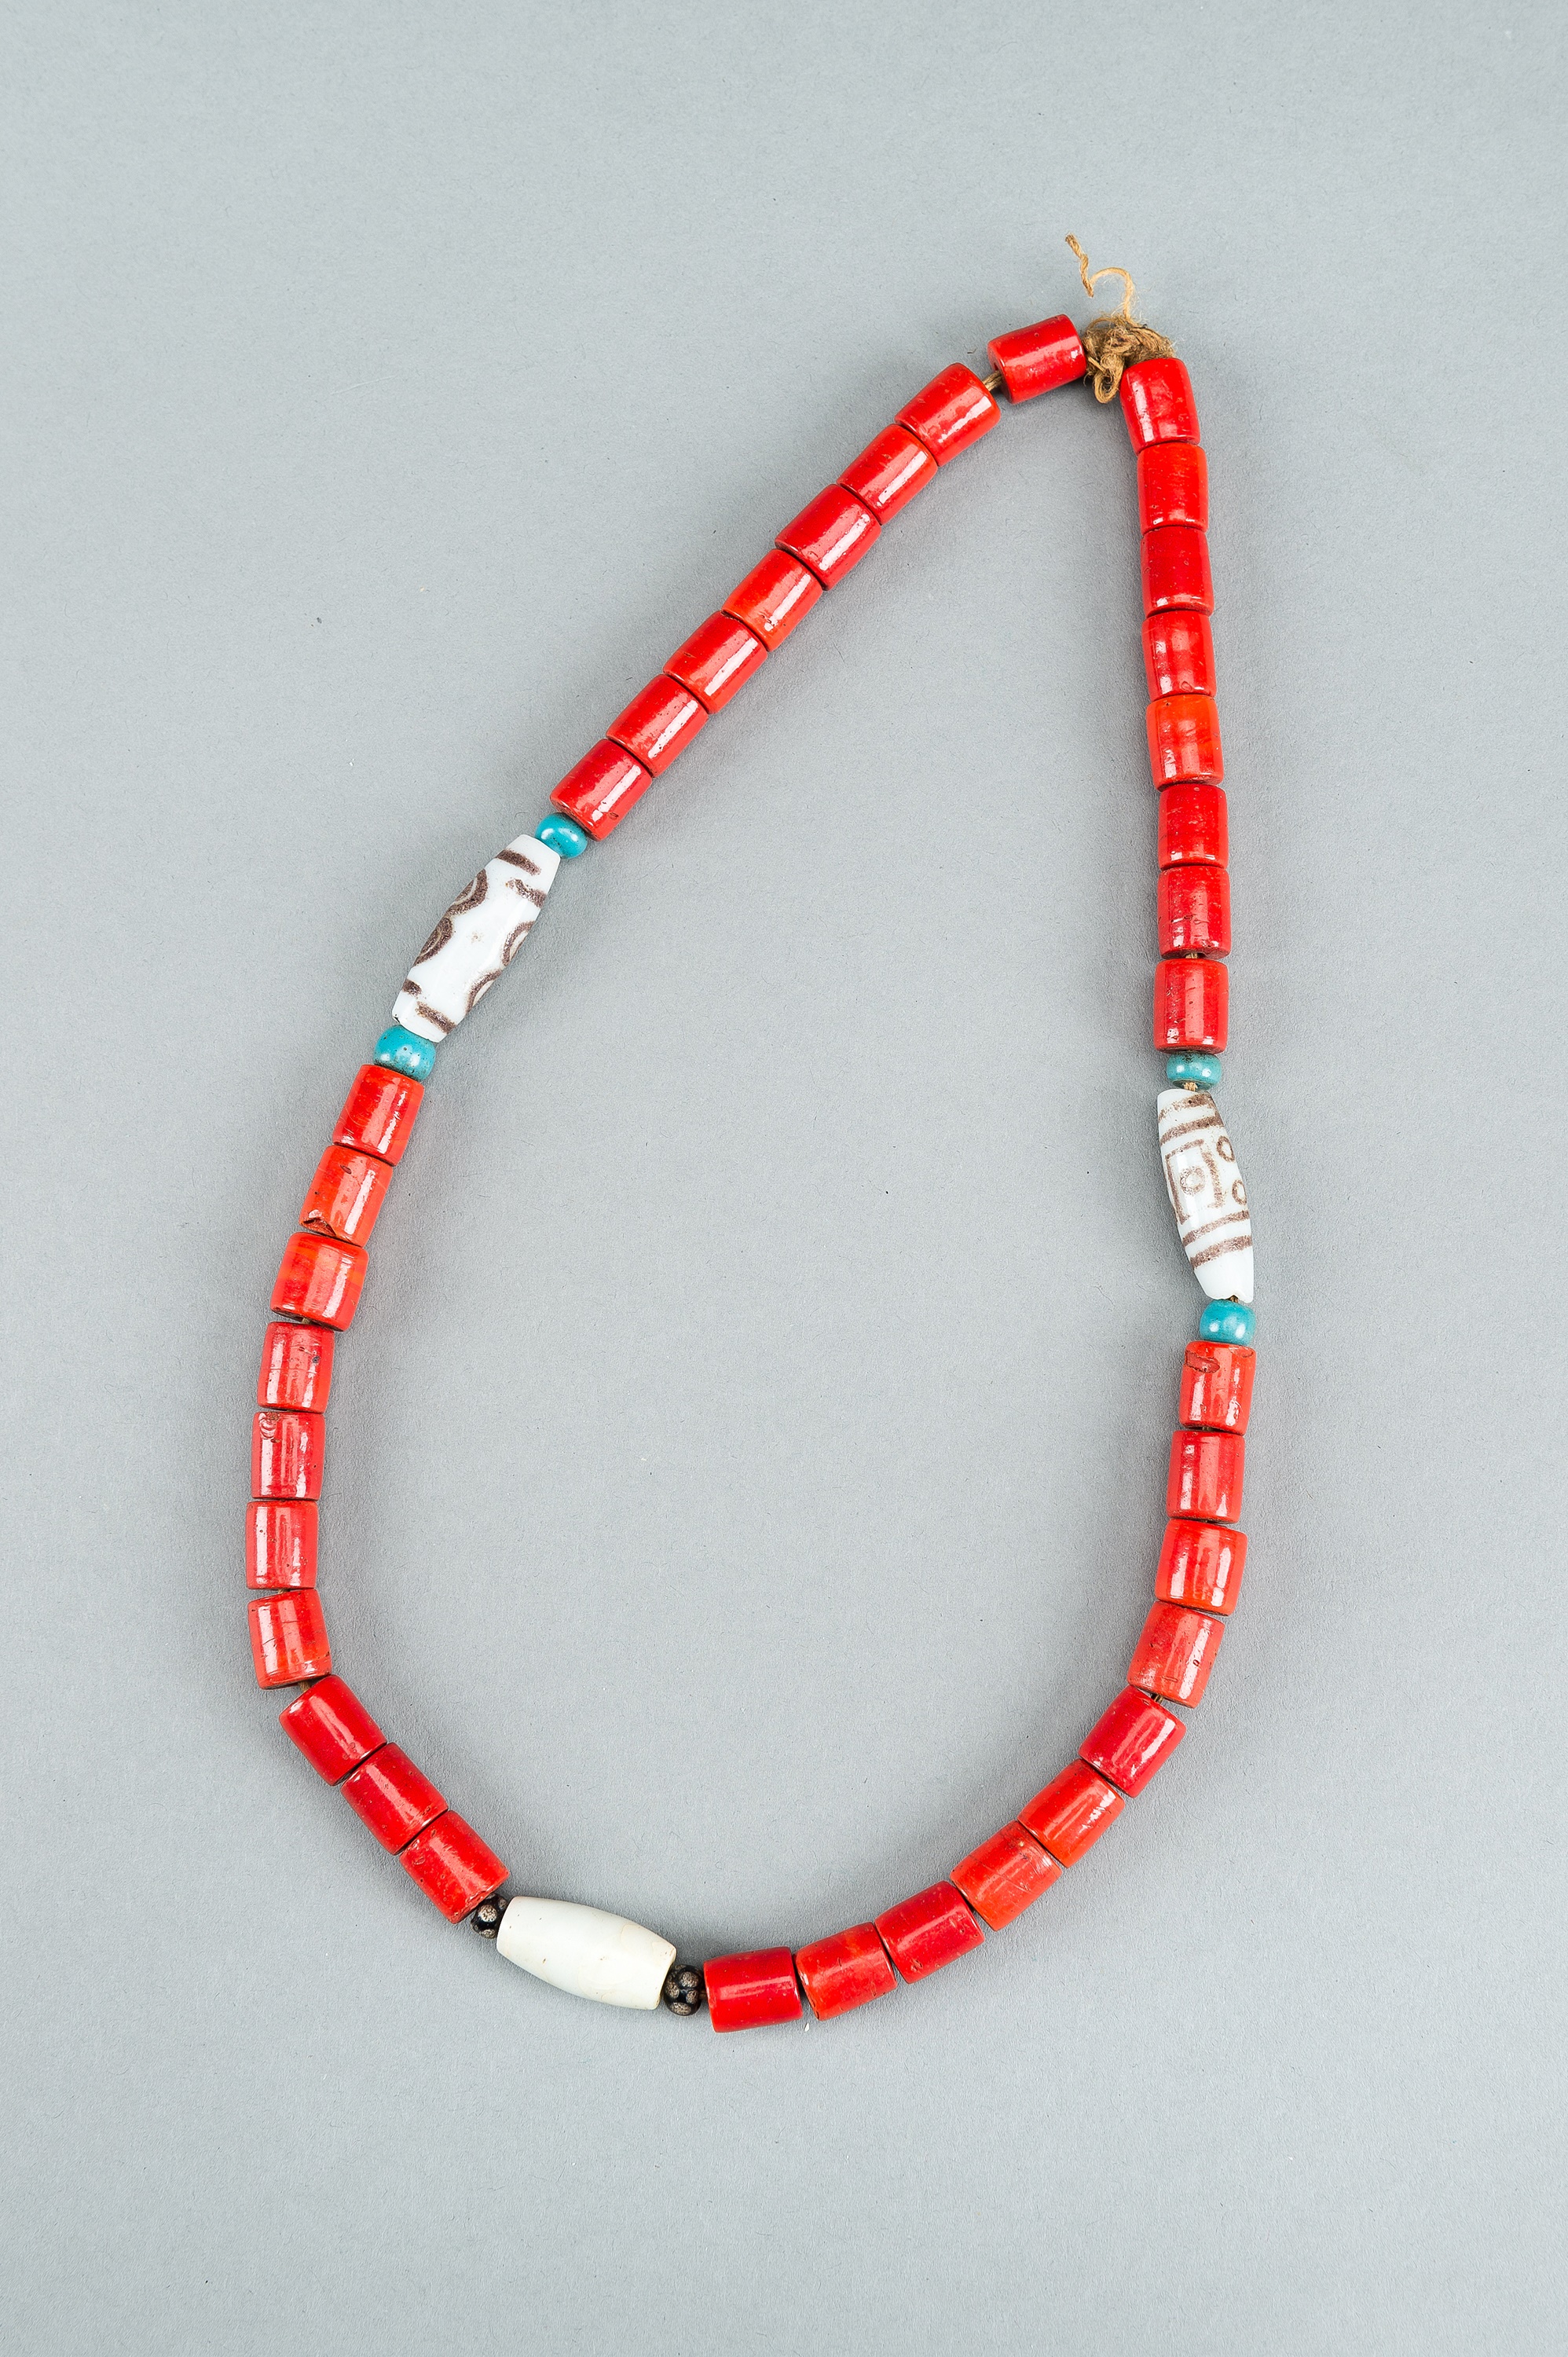 A NAGALAND DZI AND CORAL GLASS NECKLACE, c. 1900s - Image 9 of 9